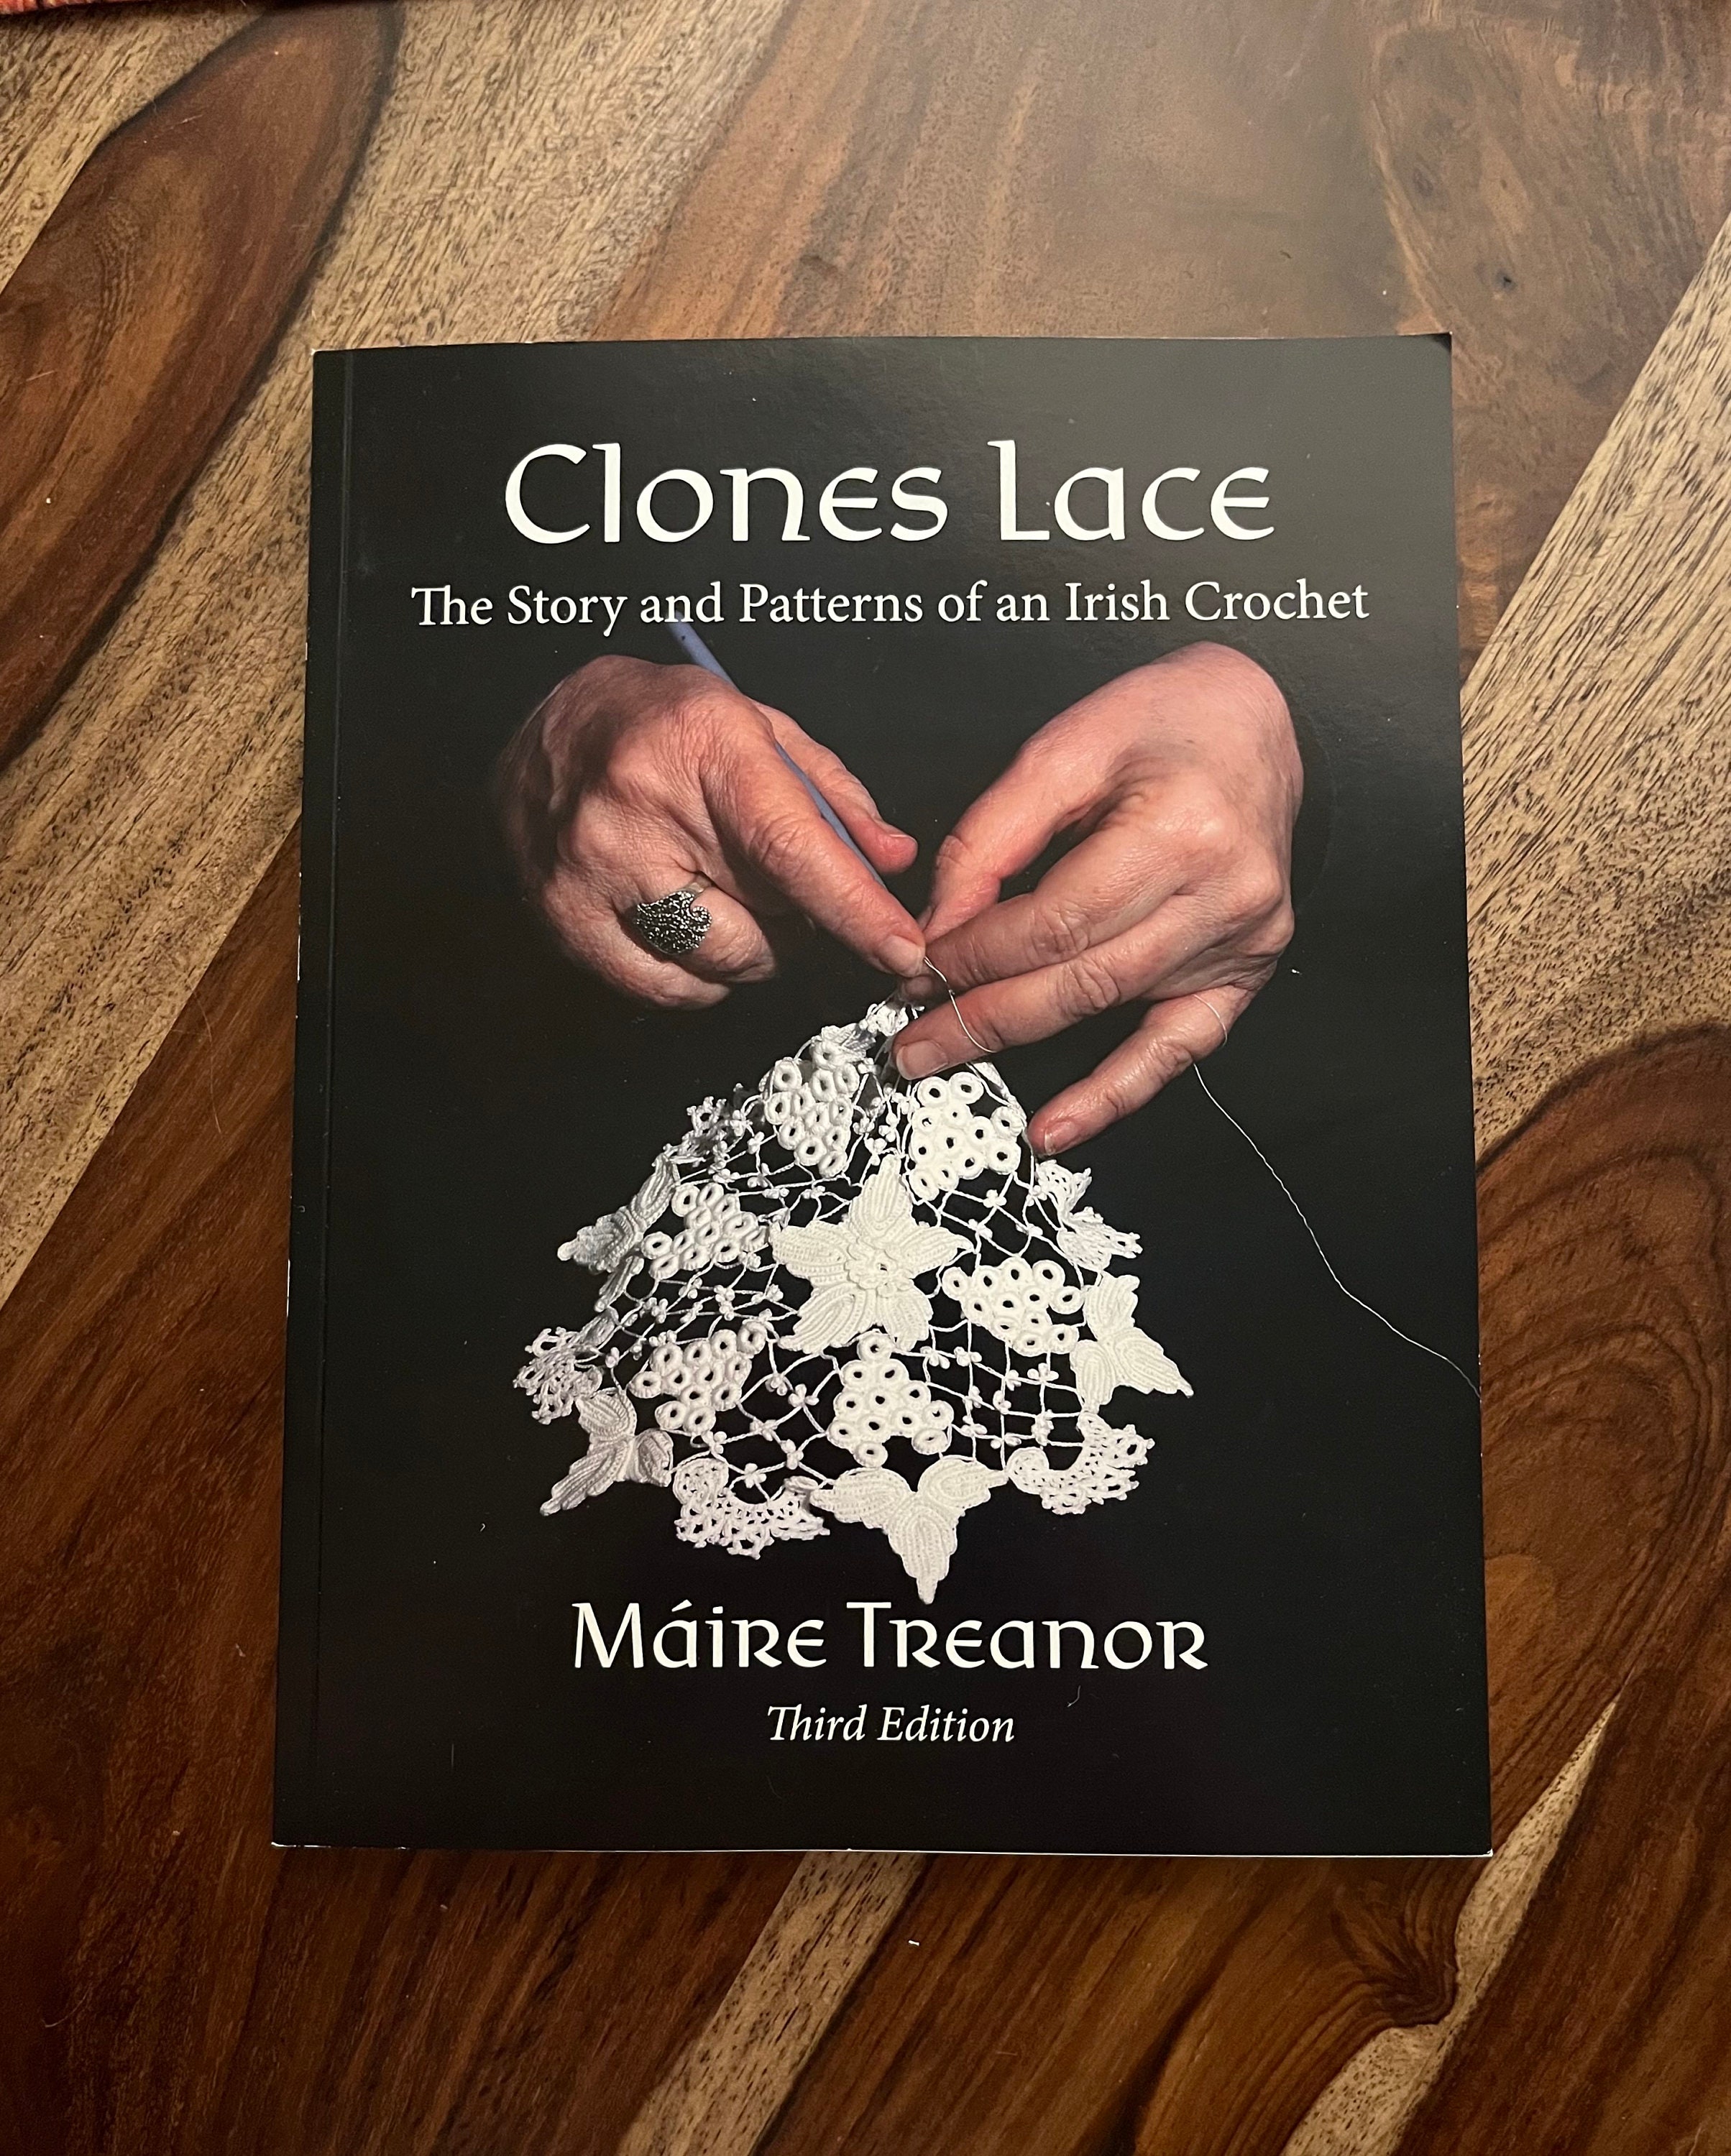 New Edition Clones Lace Book by Maire Treanor Third Edition the Story and  Patterns of an Irish Crochet W/ History, Instruction and More -  Canada